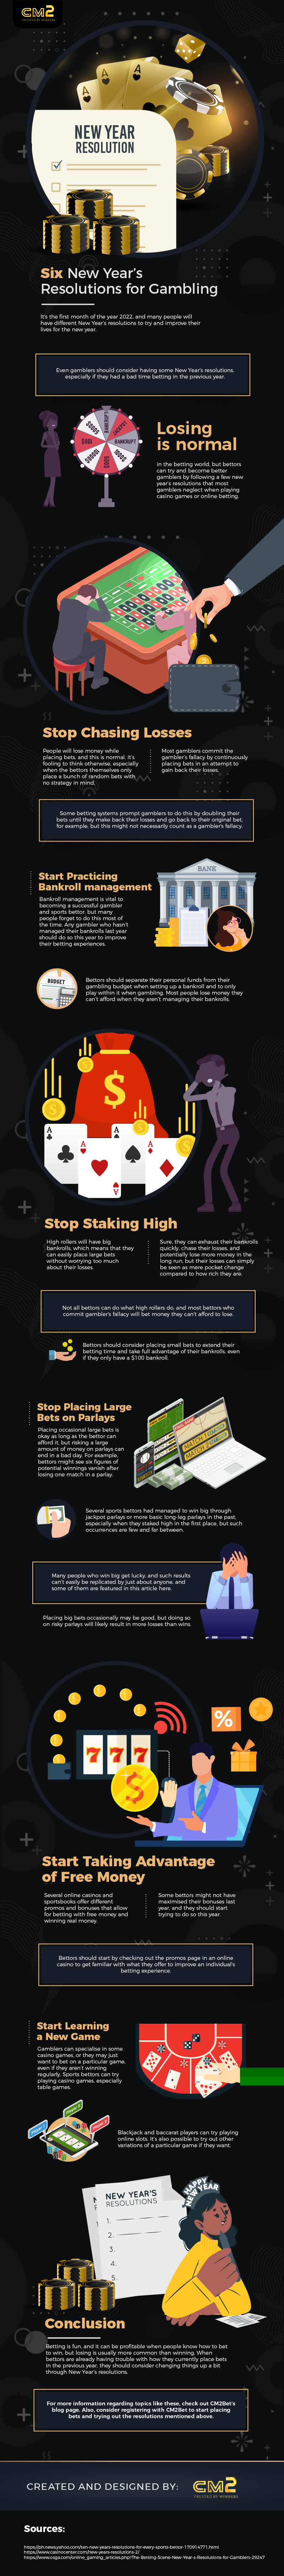 Six New Year’s Resolutions for Gambling